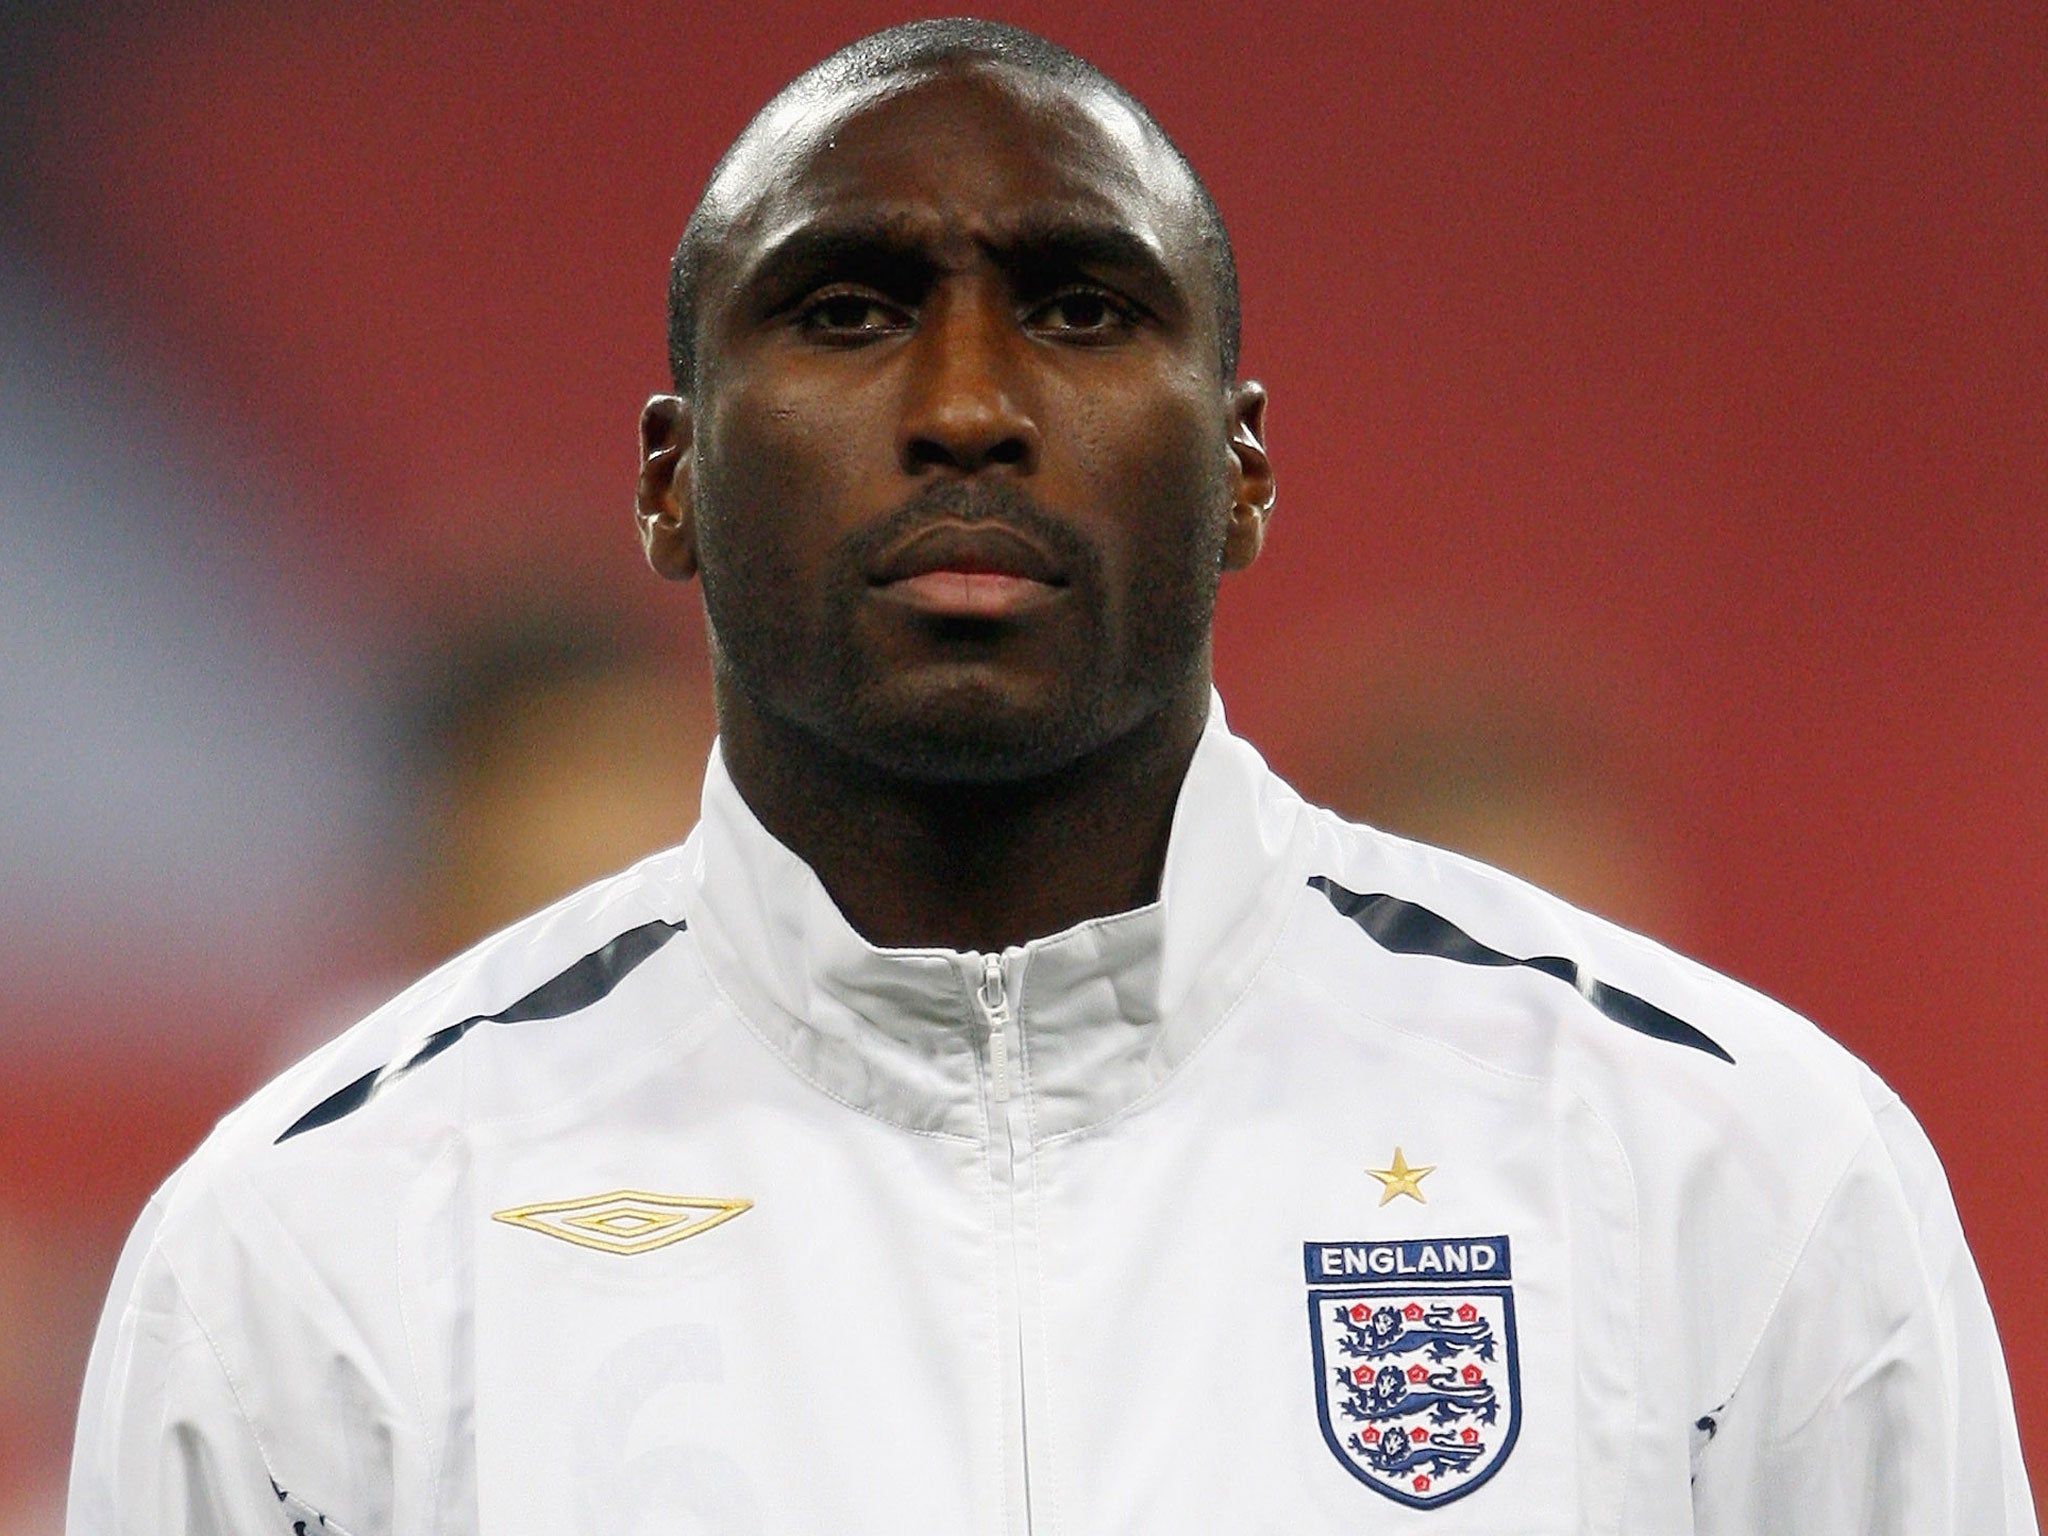 Sol Campbell pictured before England's Euro 2008 qualifier against Russia in Moscow in October 2007